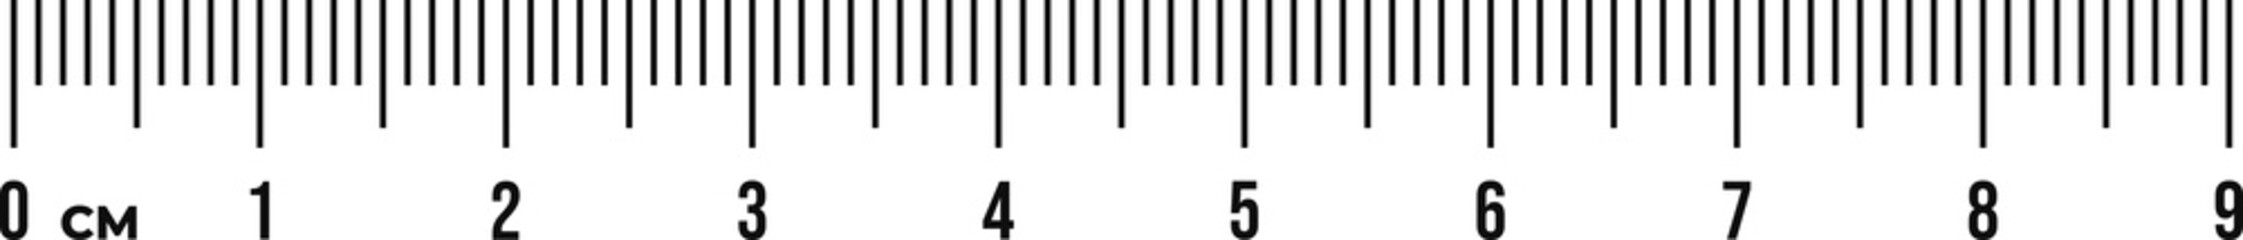 Ruler scale 9 cm. Centimeter scale for measuring